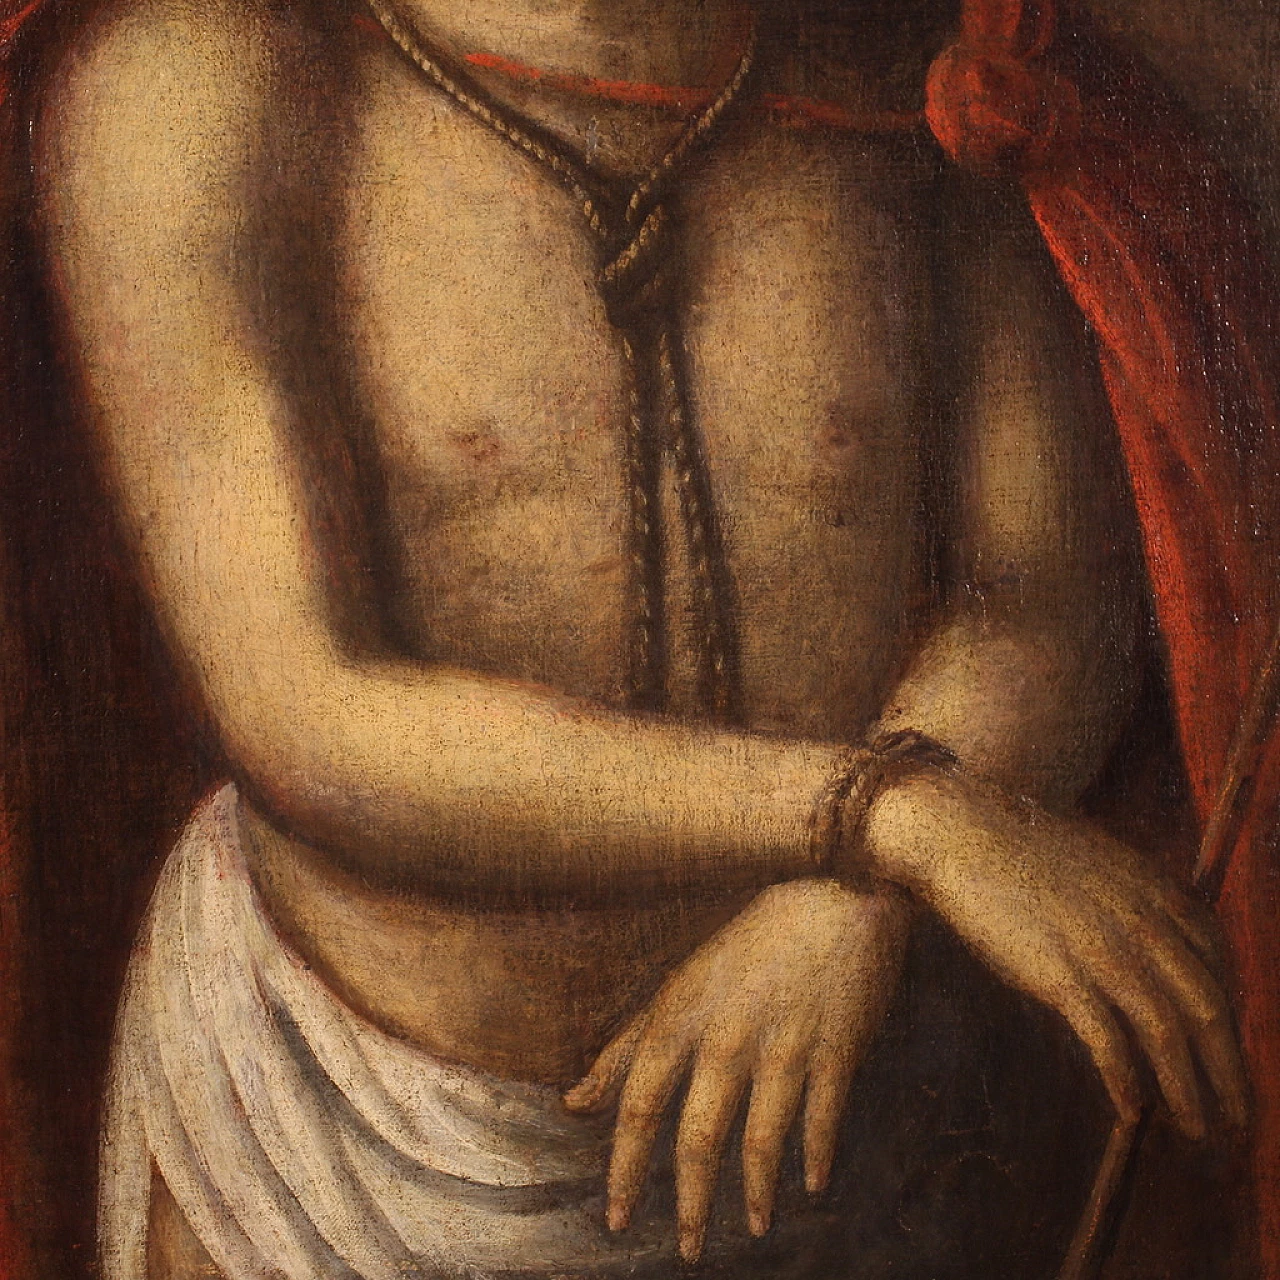 Ecce Homo painting, oil on canvas, 17th century 10